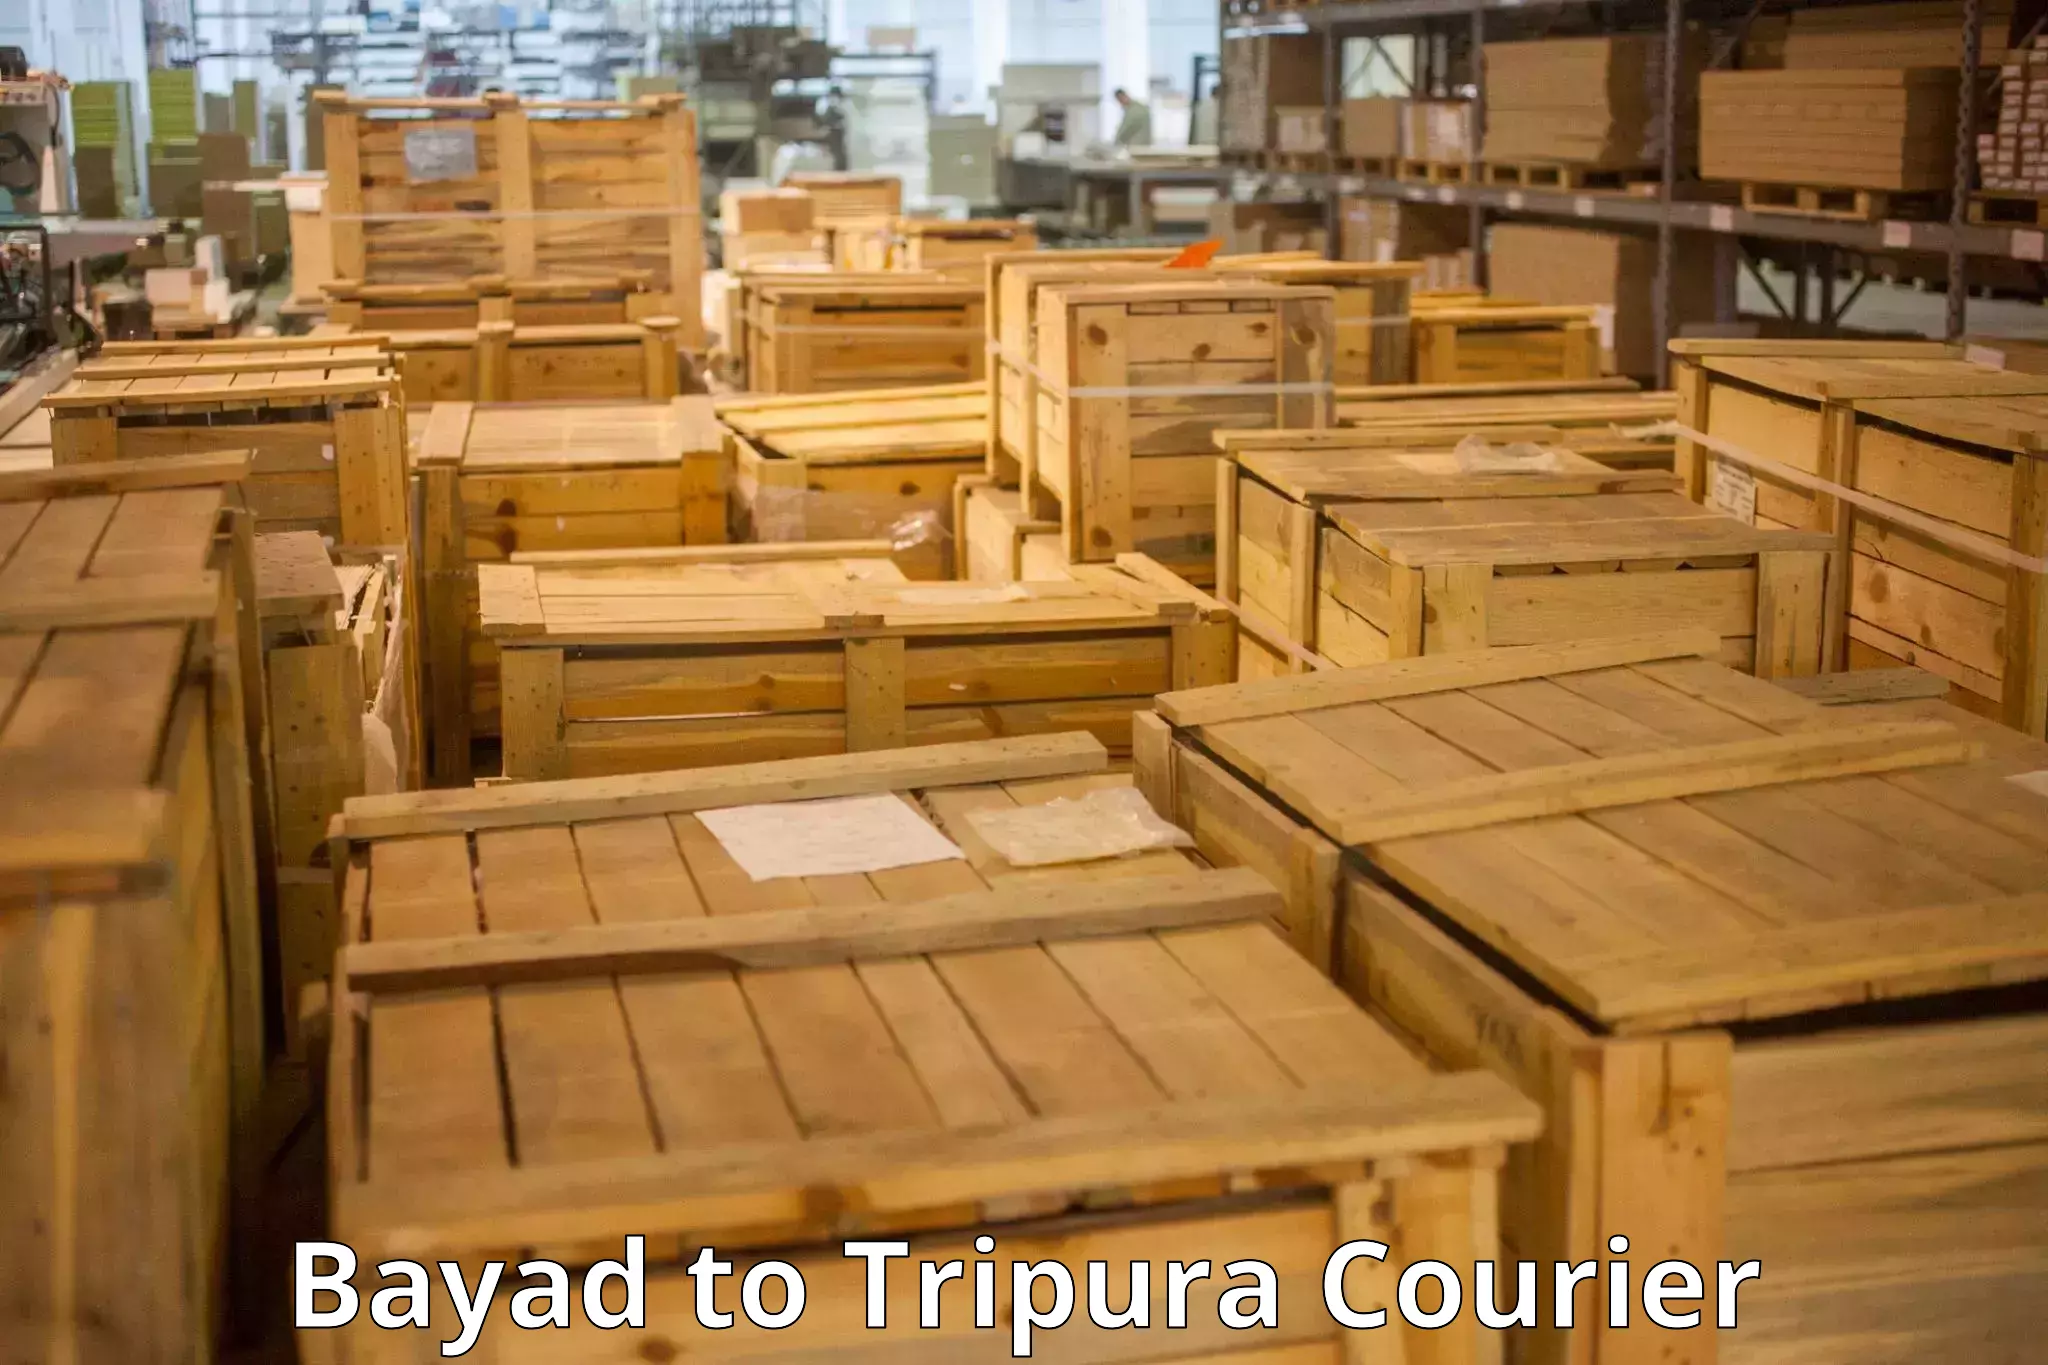 Holiday season luggage delivery in Bayad to Tripura